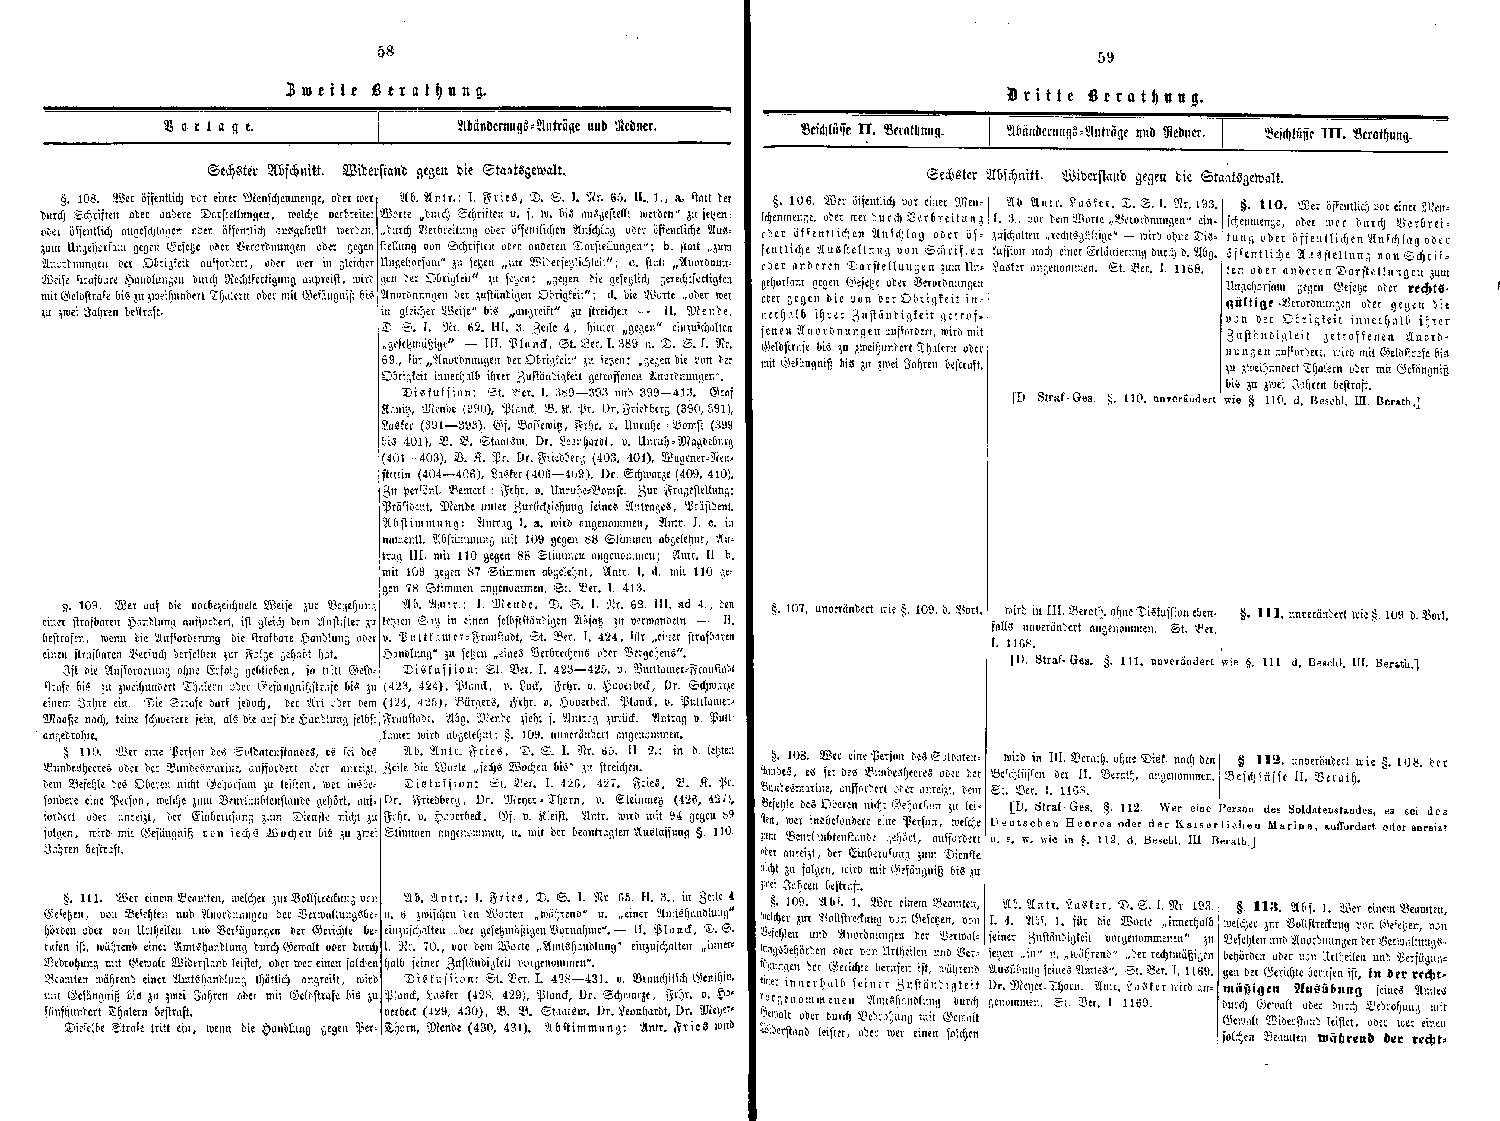 Scan of page 58-59